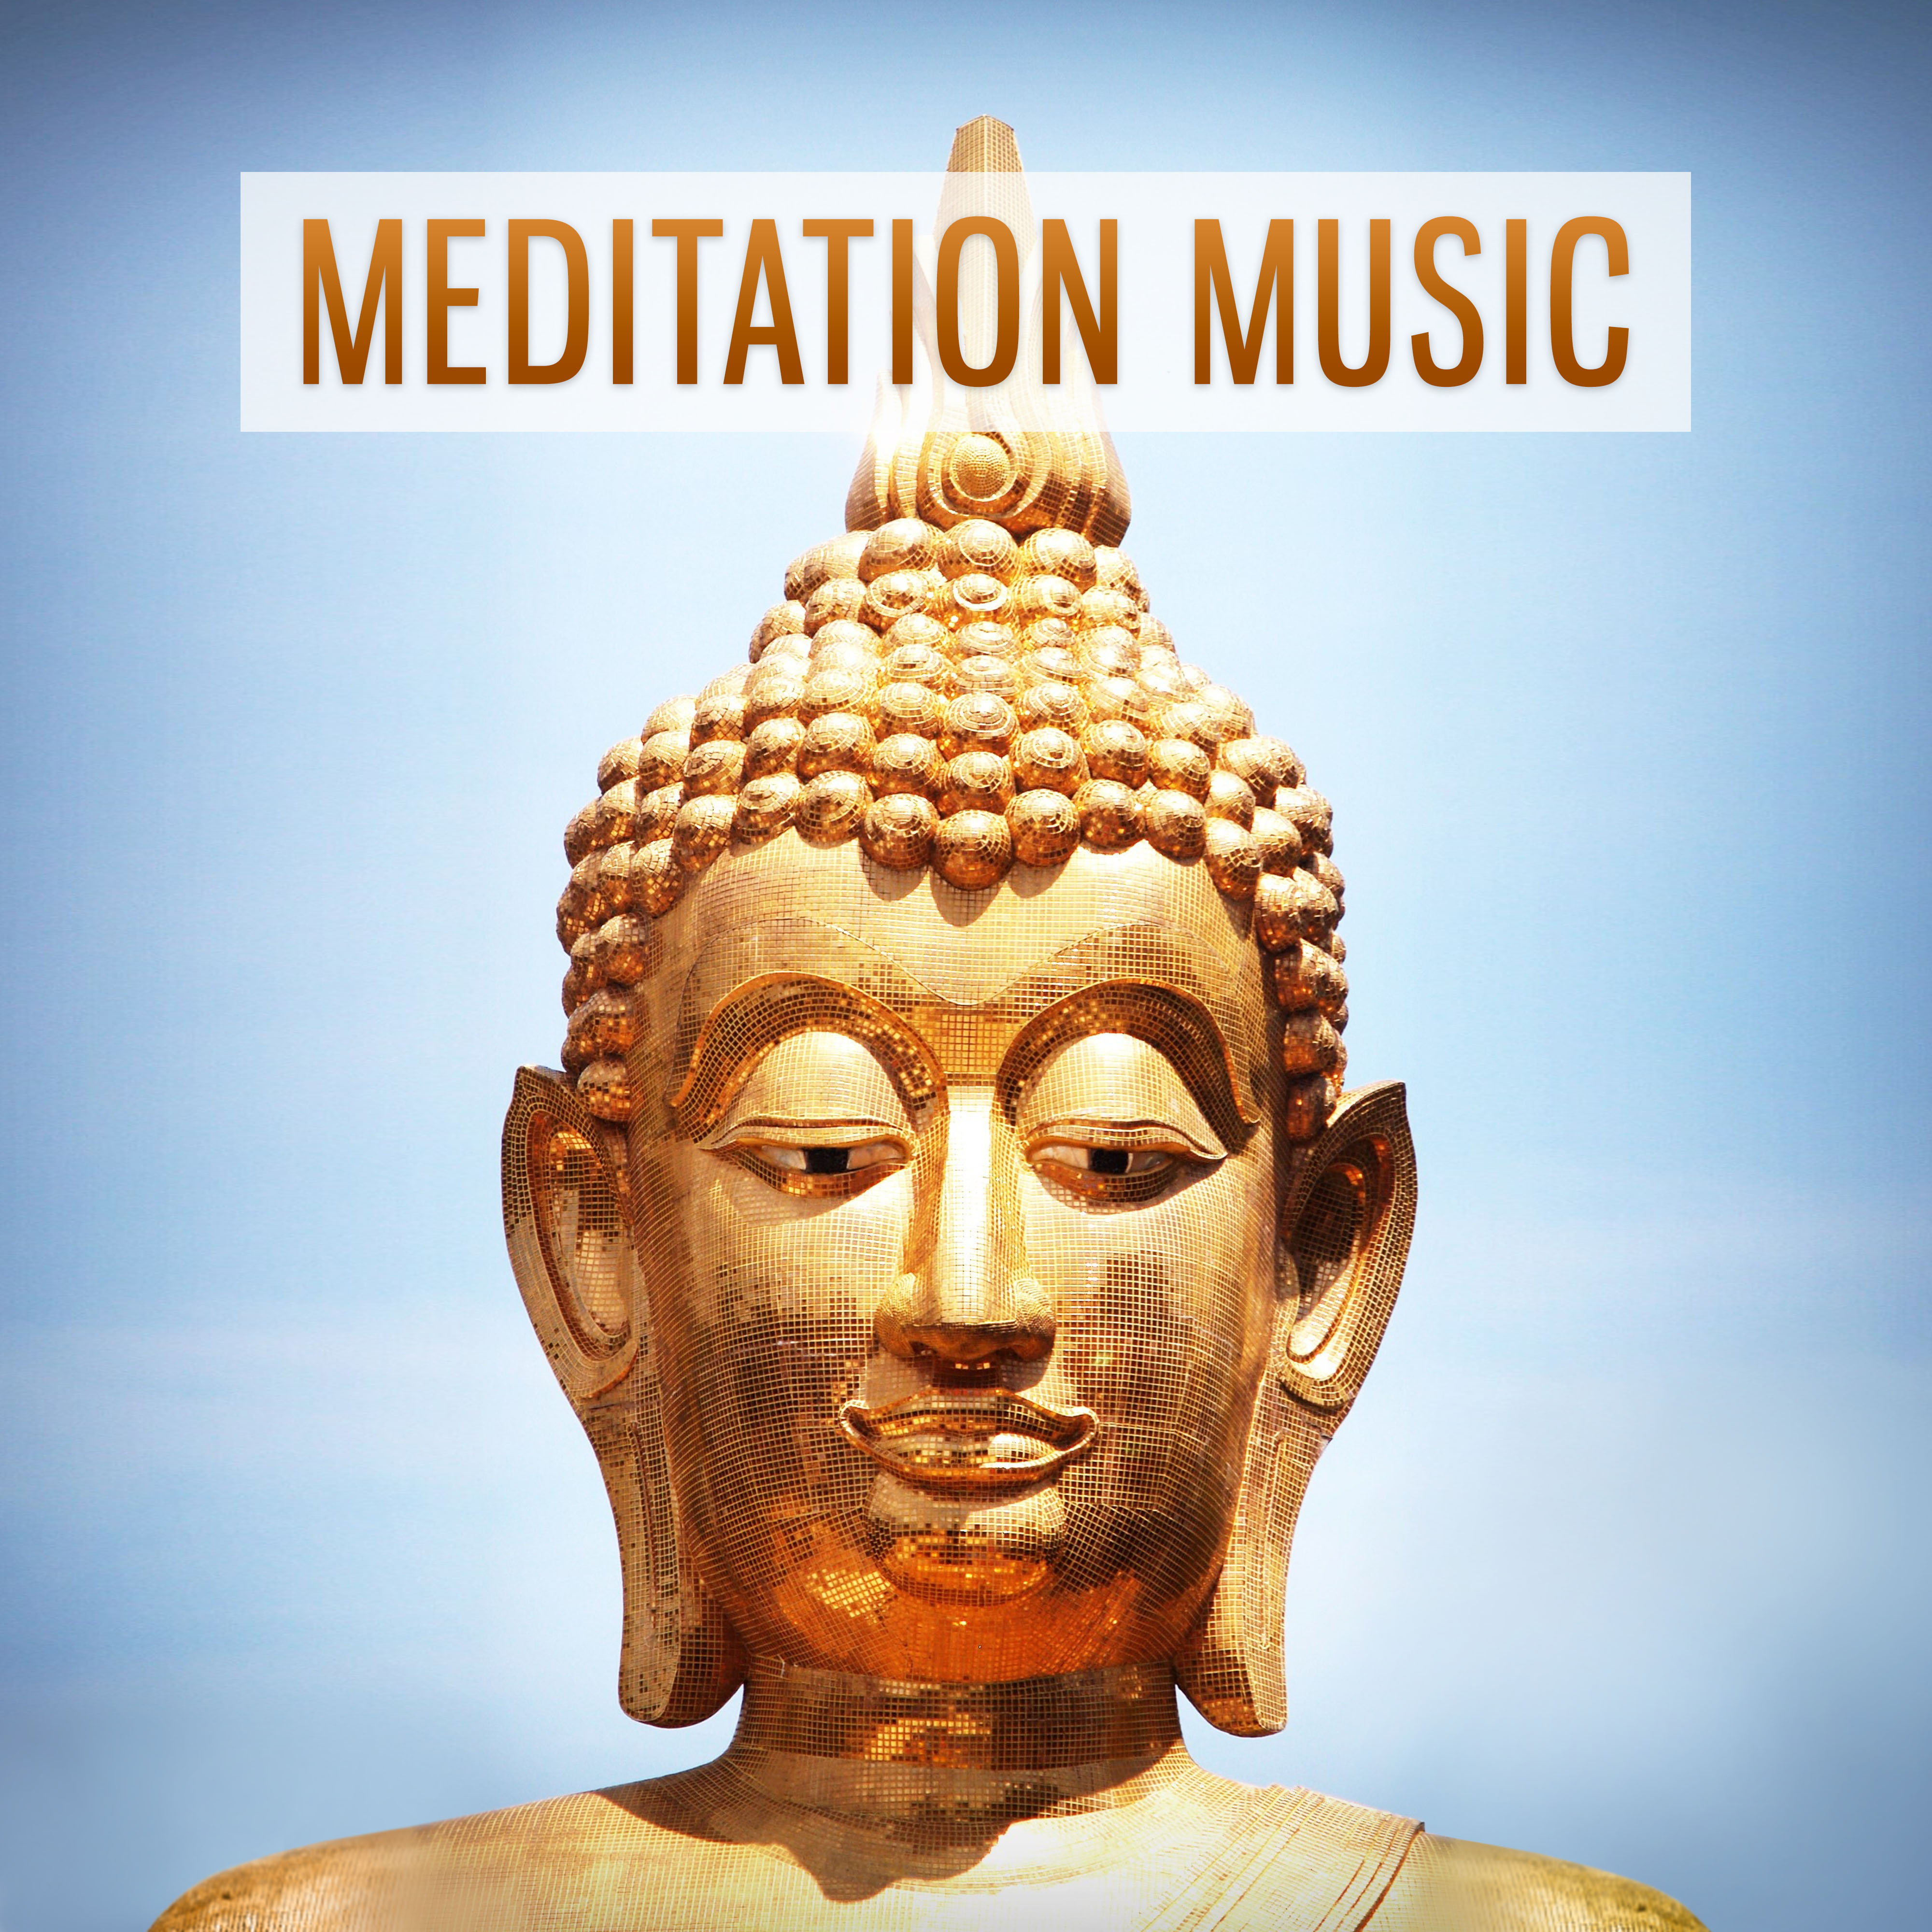 Meditation Music  Calmness Sounds of New Age Music for Pure Mediatation, Relax and Feel Inner Energy, Clear Your Mind